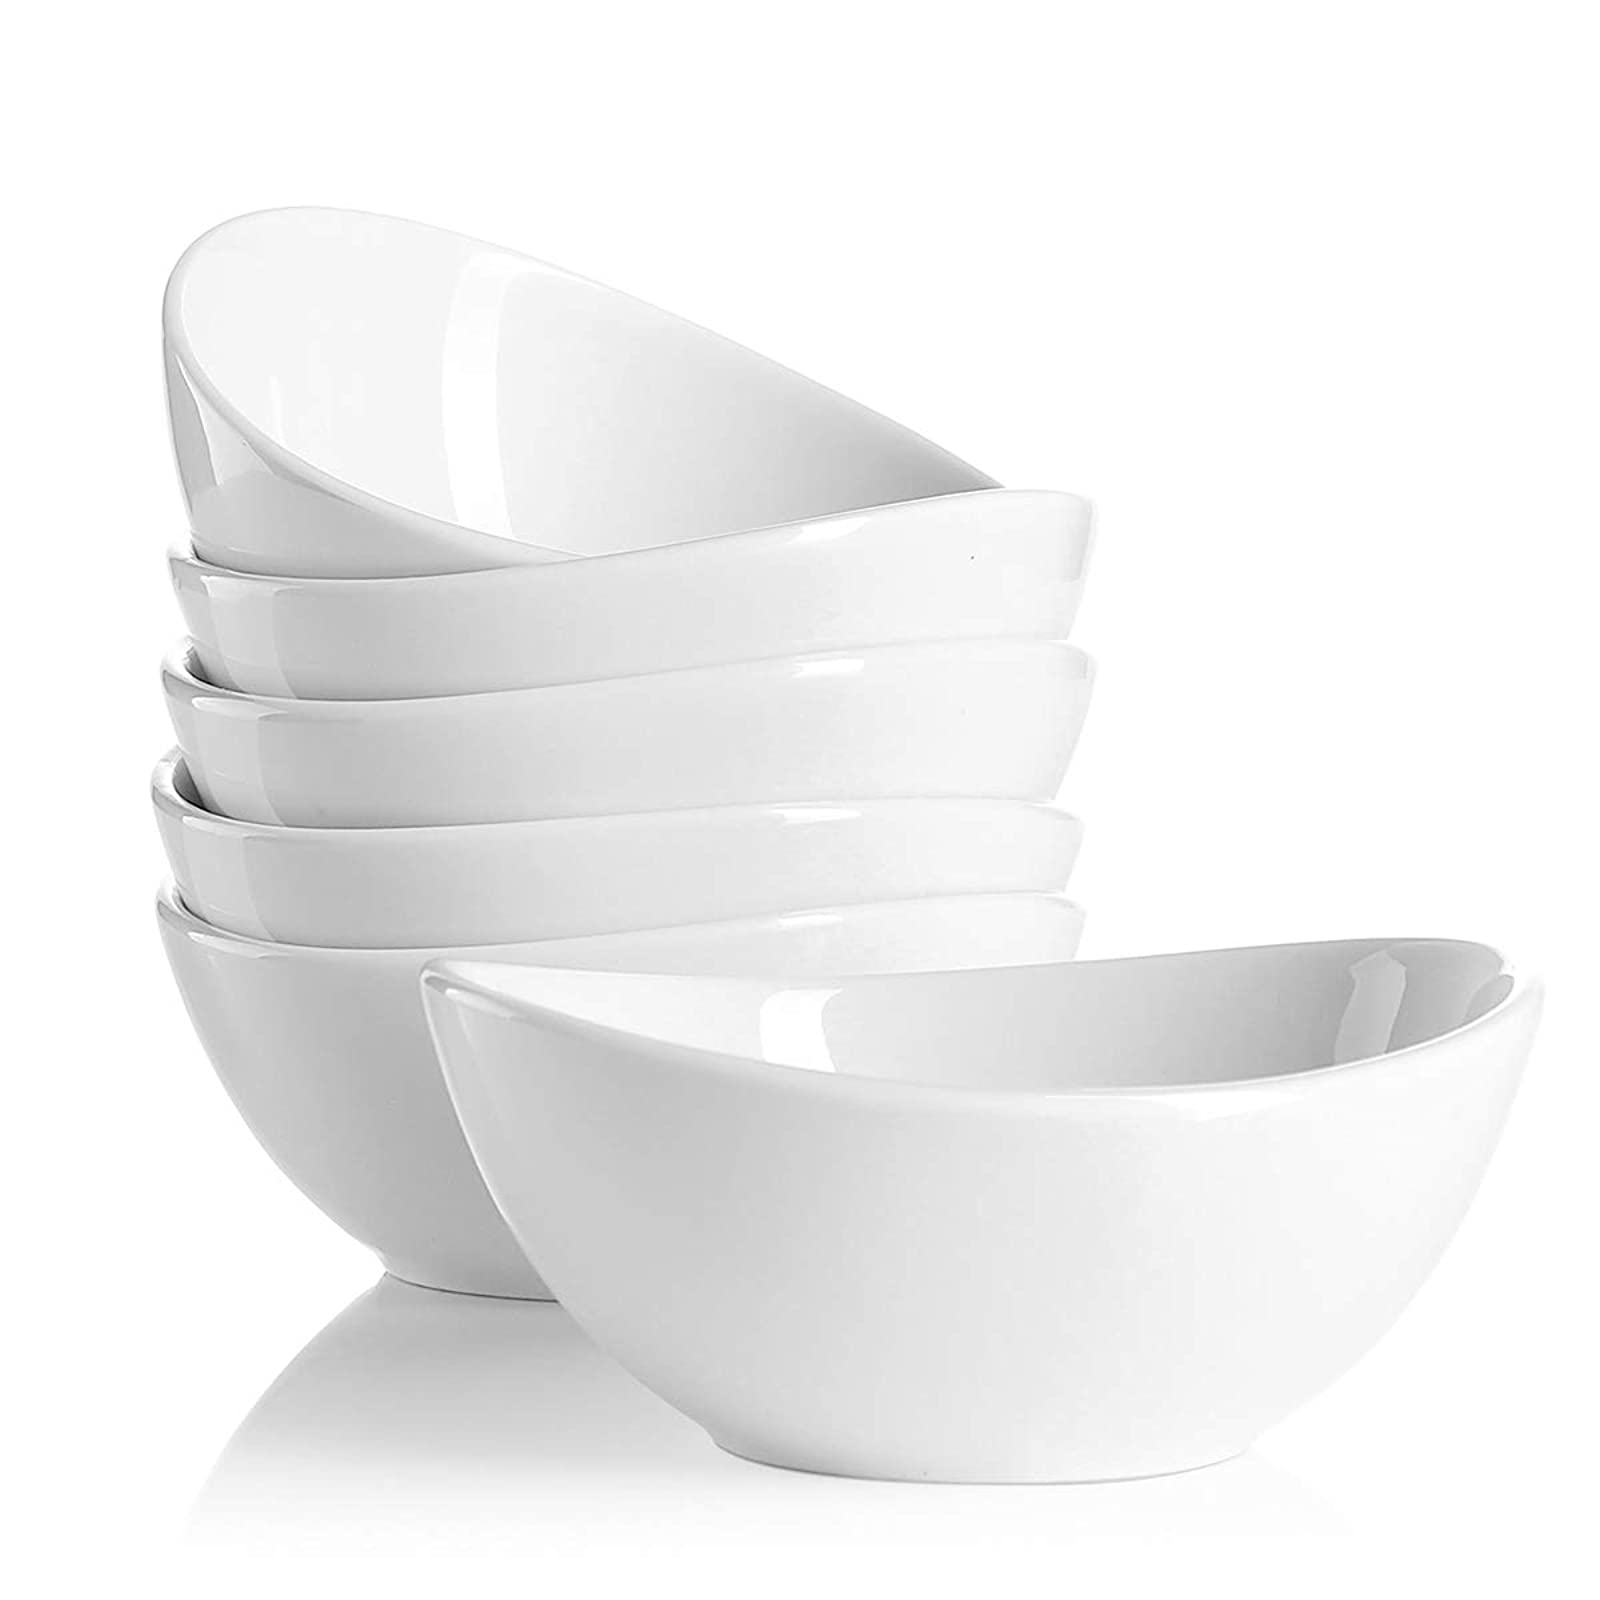 AWHOME Cereal Bowls Porcelain Bowls-14 Ounce for Small Side Dishes Ice Cream Dessert Set of 4 Square,White, 14 oz 